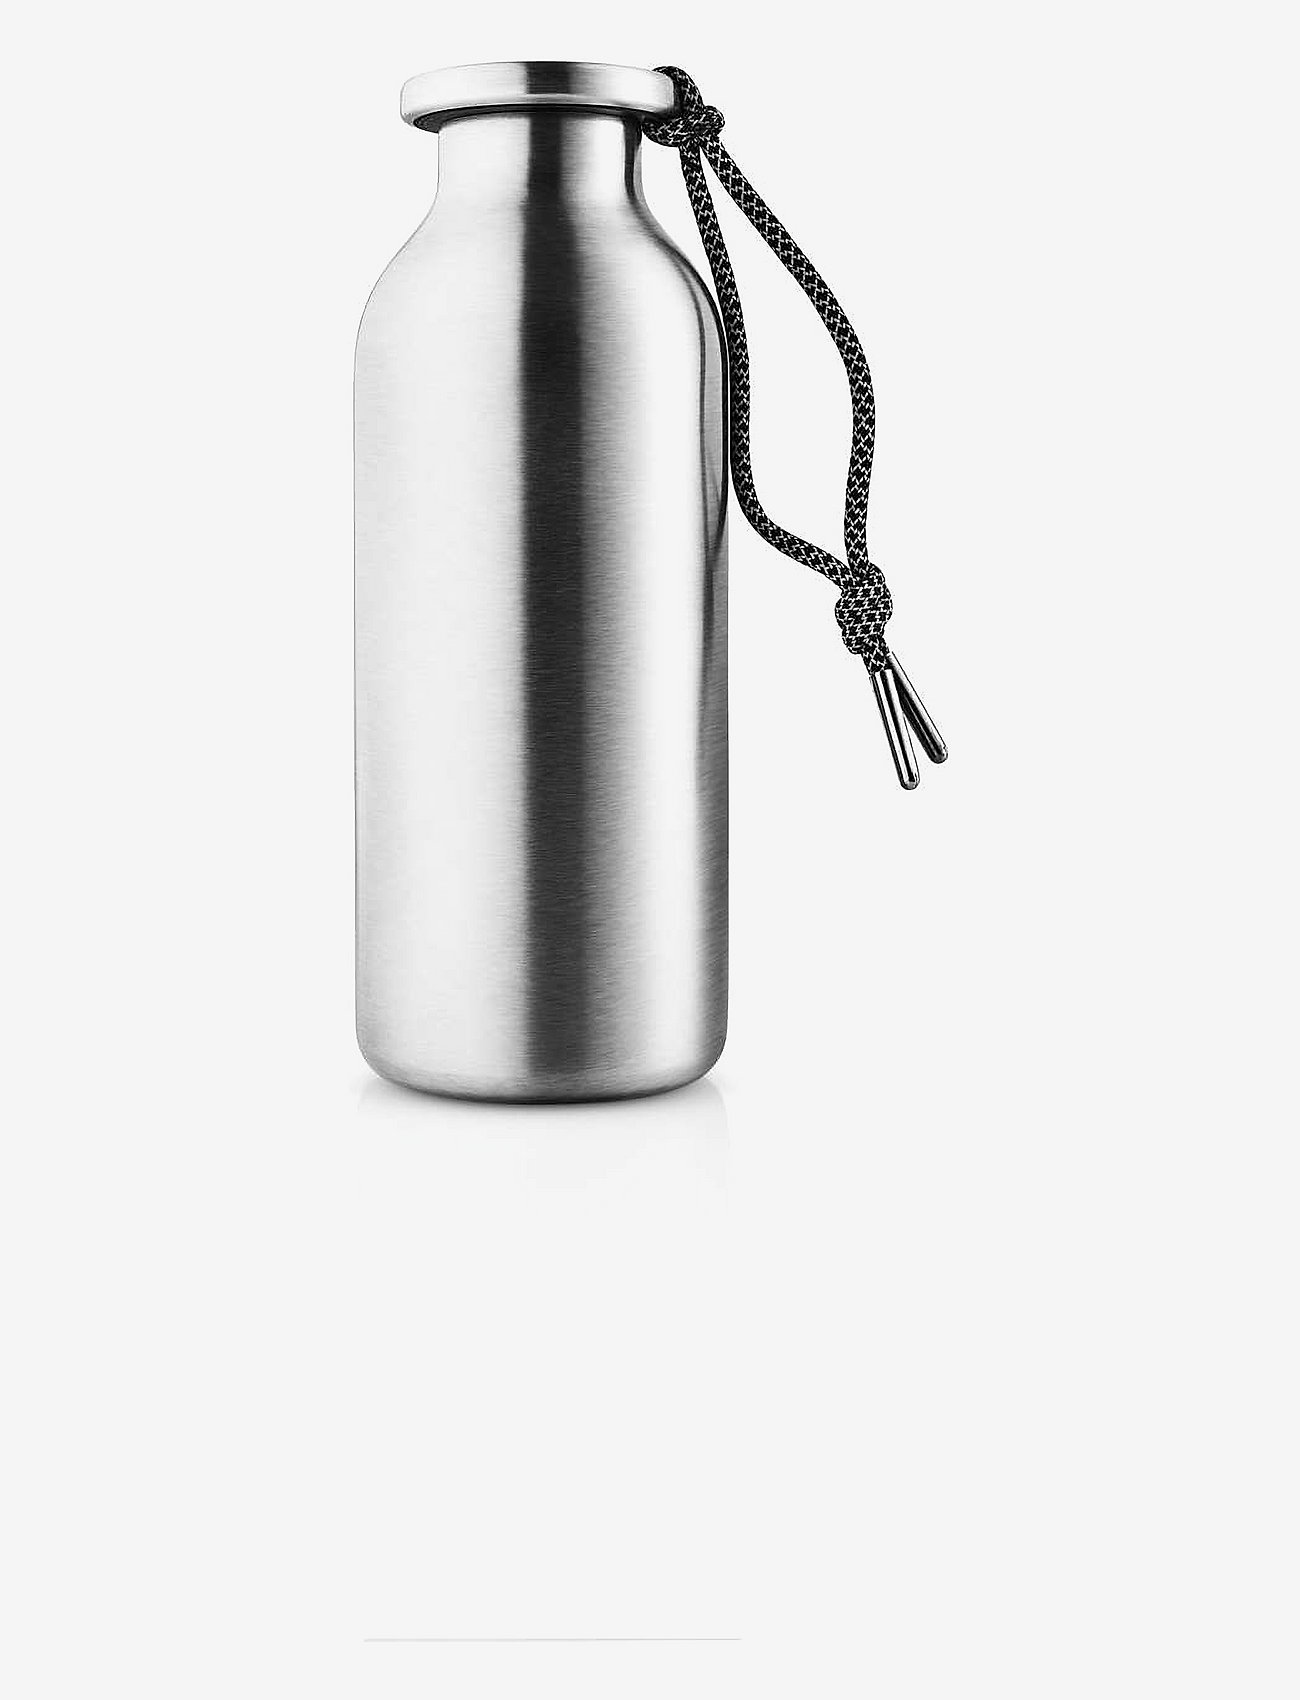 Eva Solo - 24/12 To Go thermo flask - madalaimad hinnad - stainless steel - 1